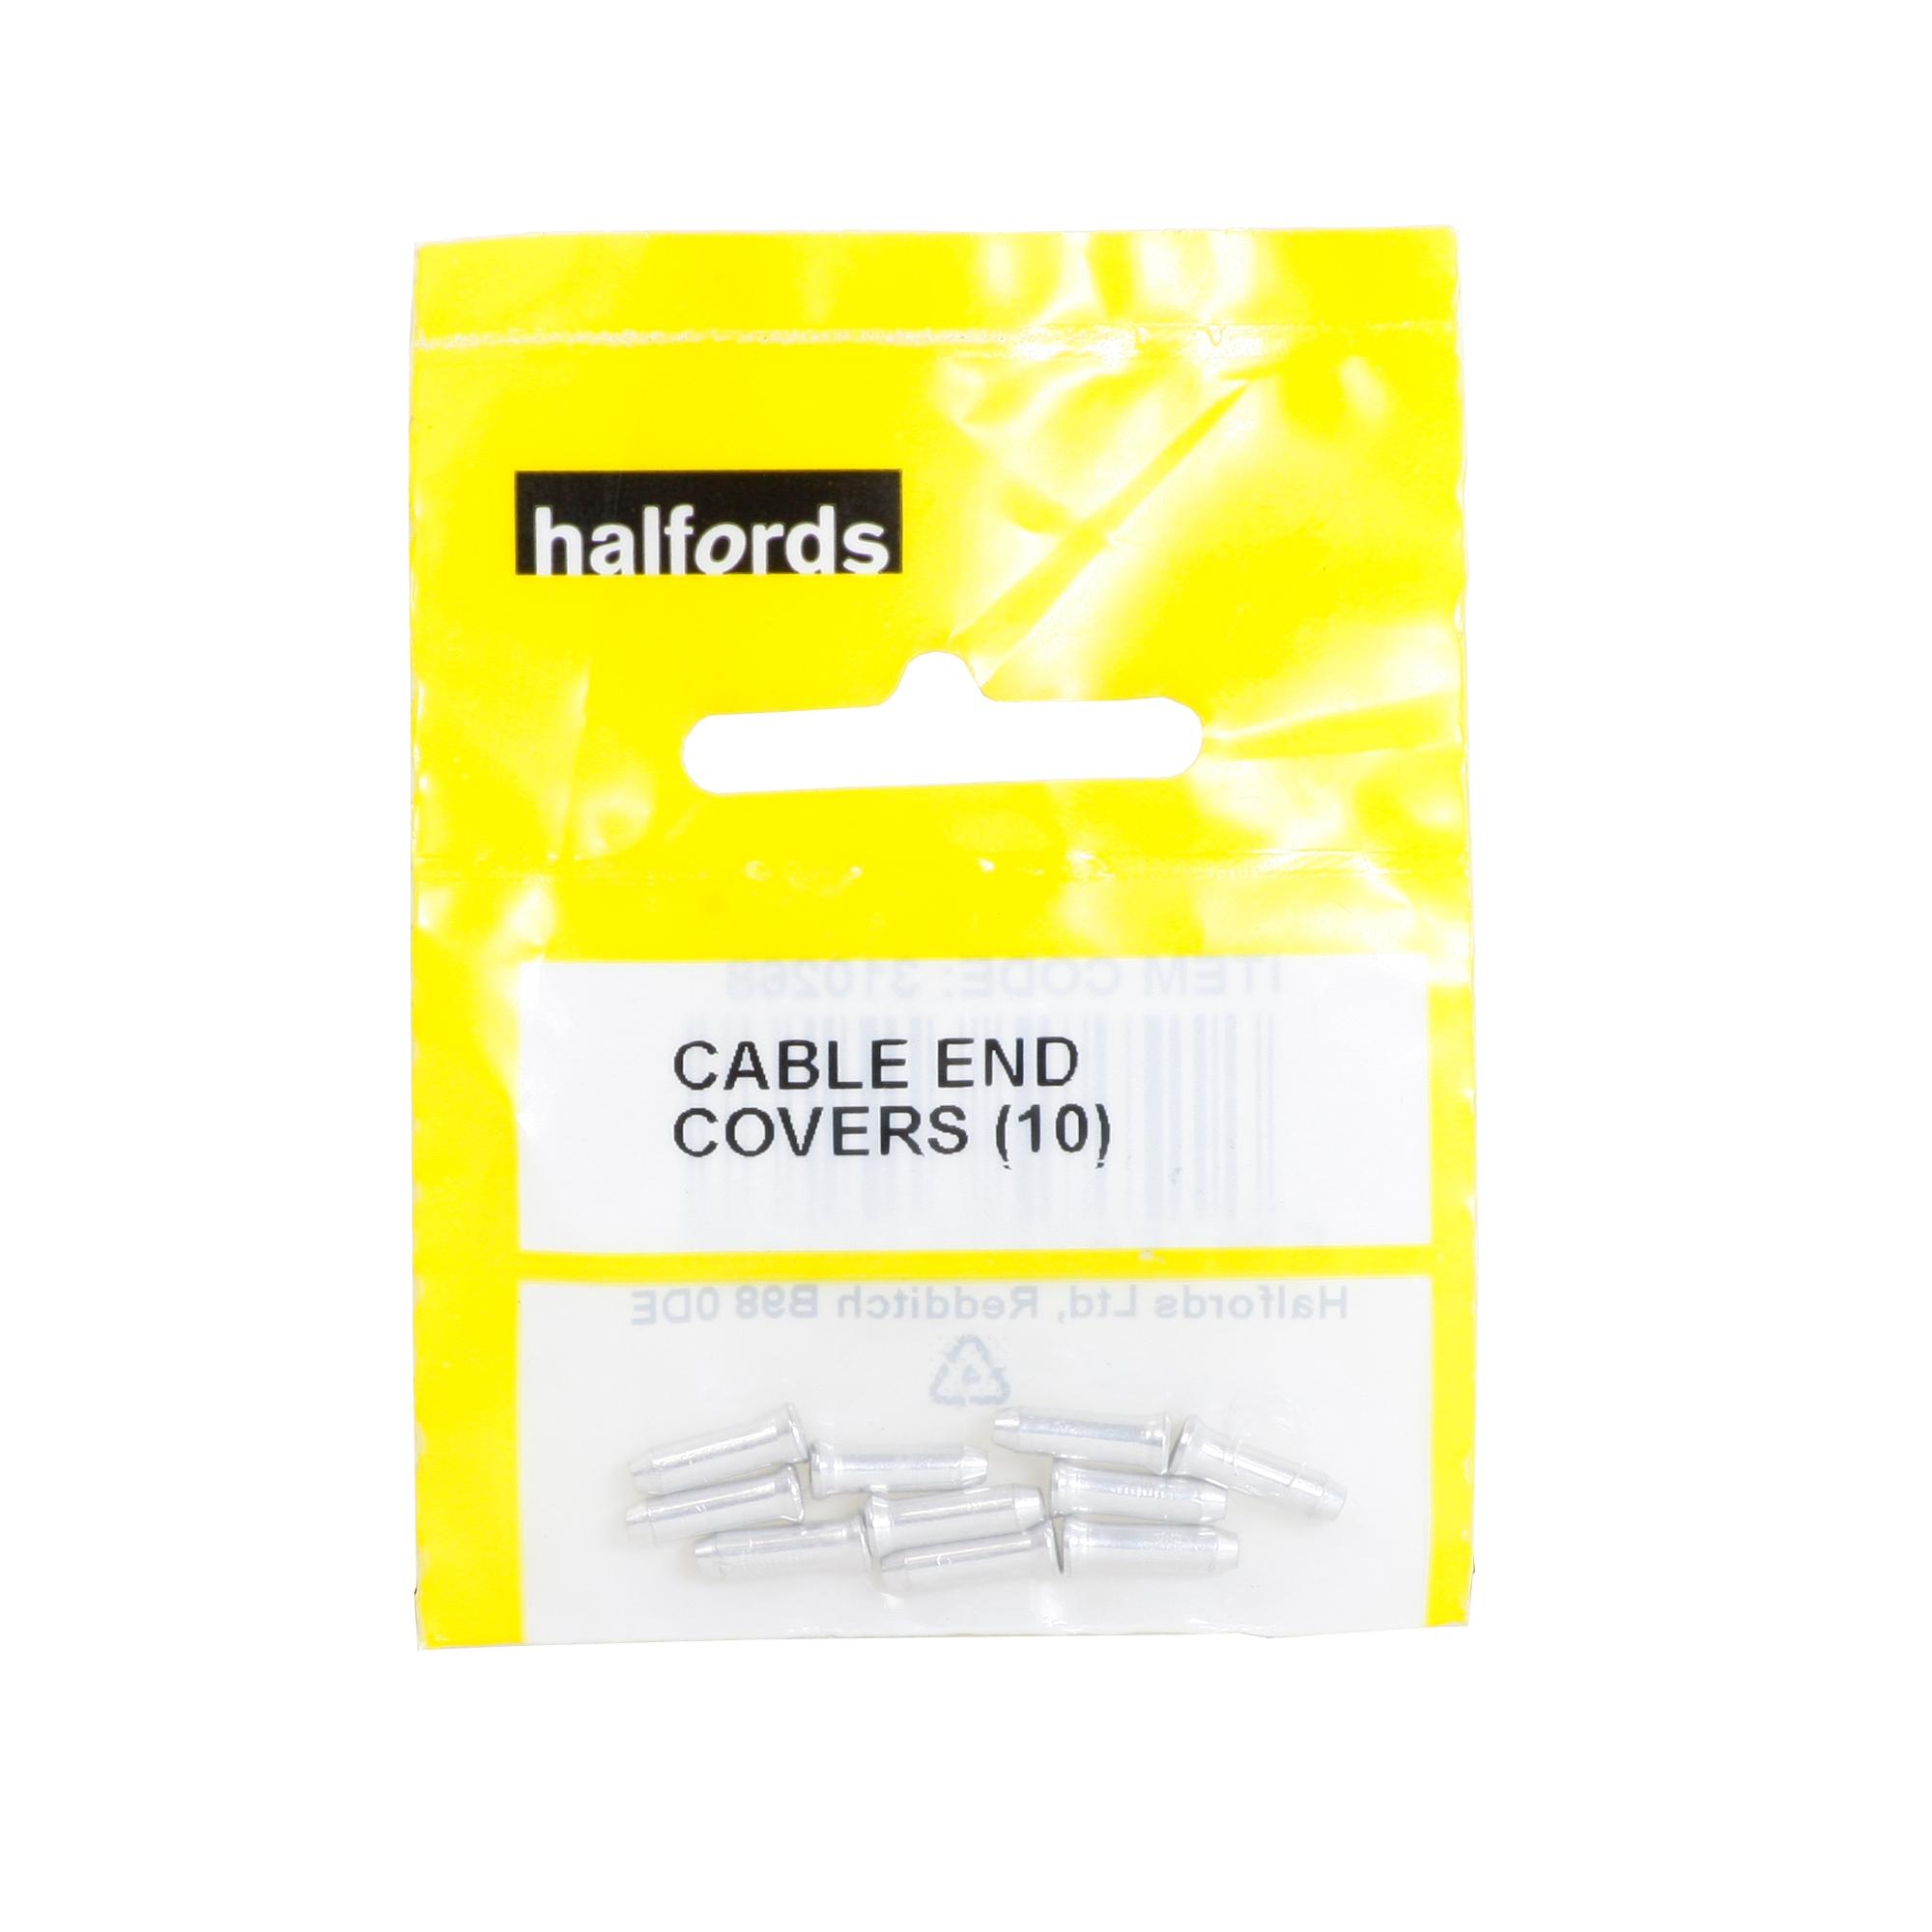 Halfords Gear & Brake Cable End Covers